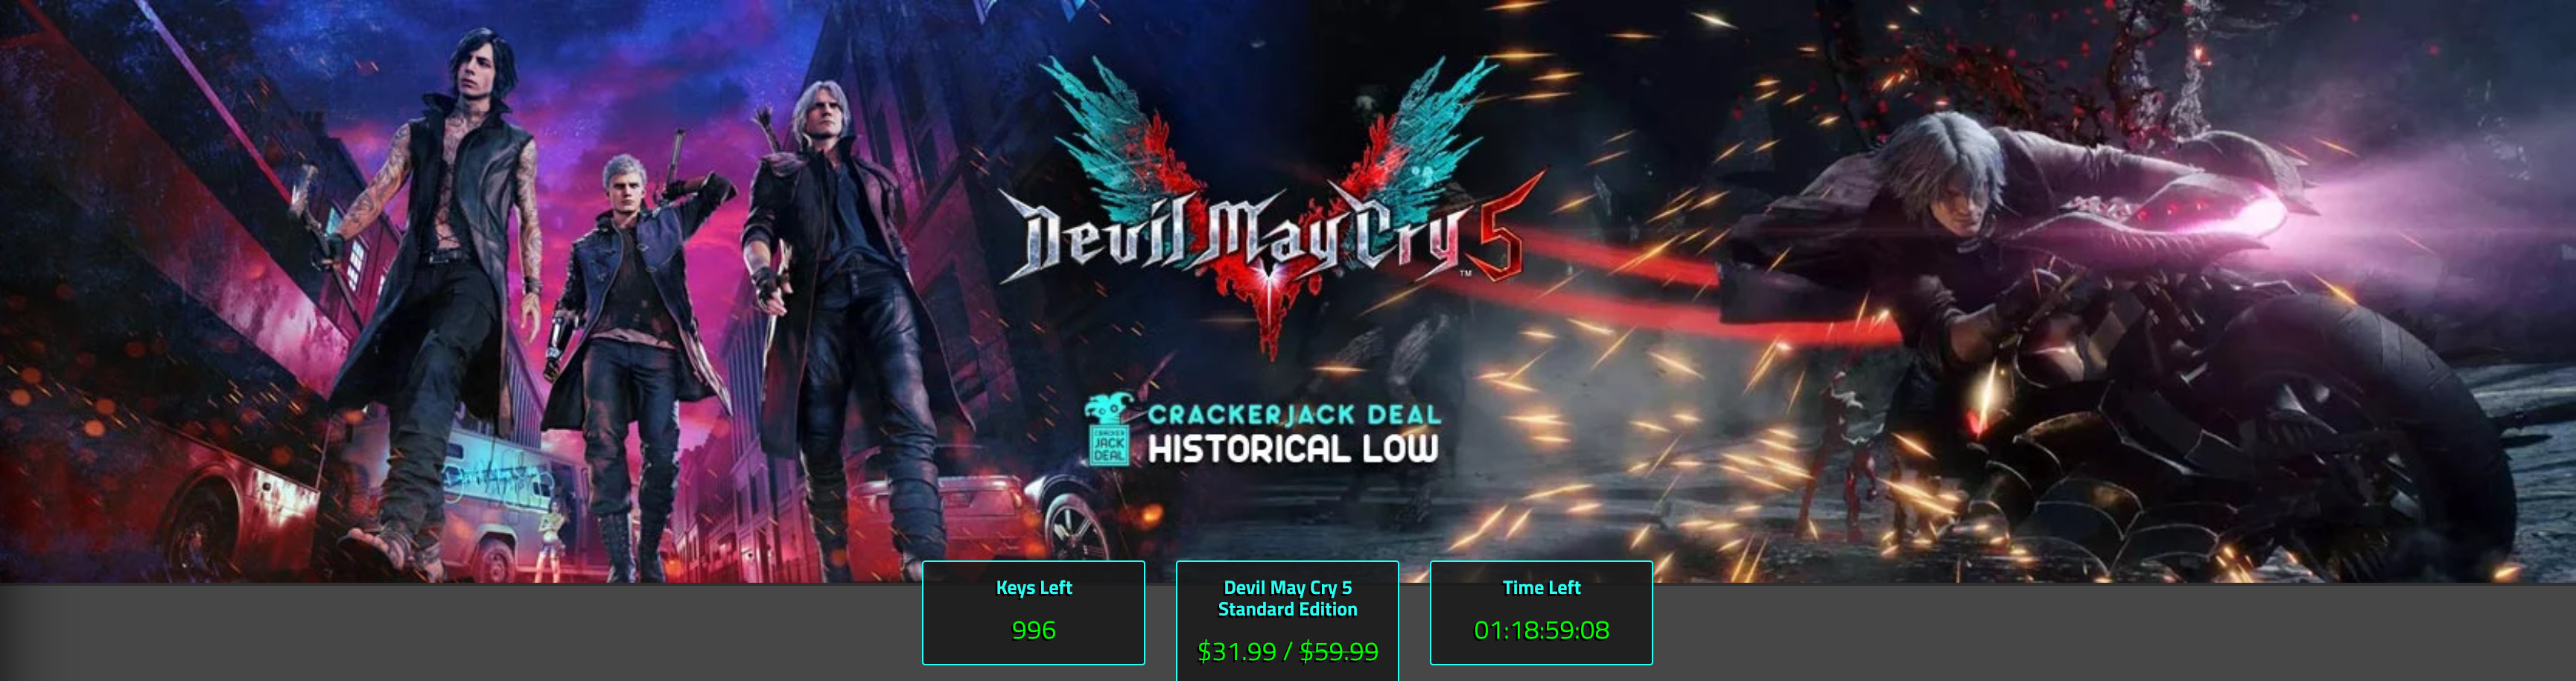 Screenshot_2019-06-04 Devil May Cry 5 at a demoniacal low price .jpg